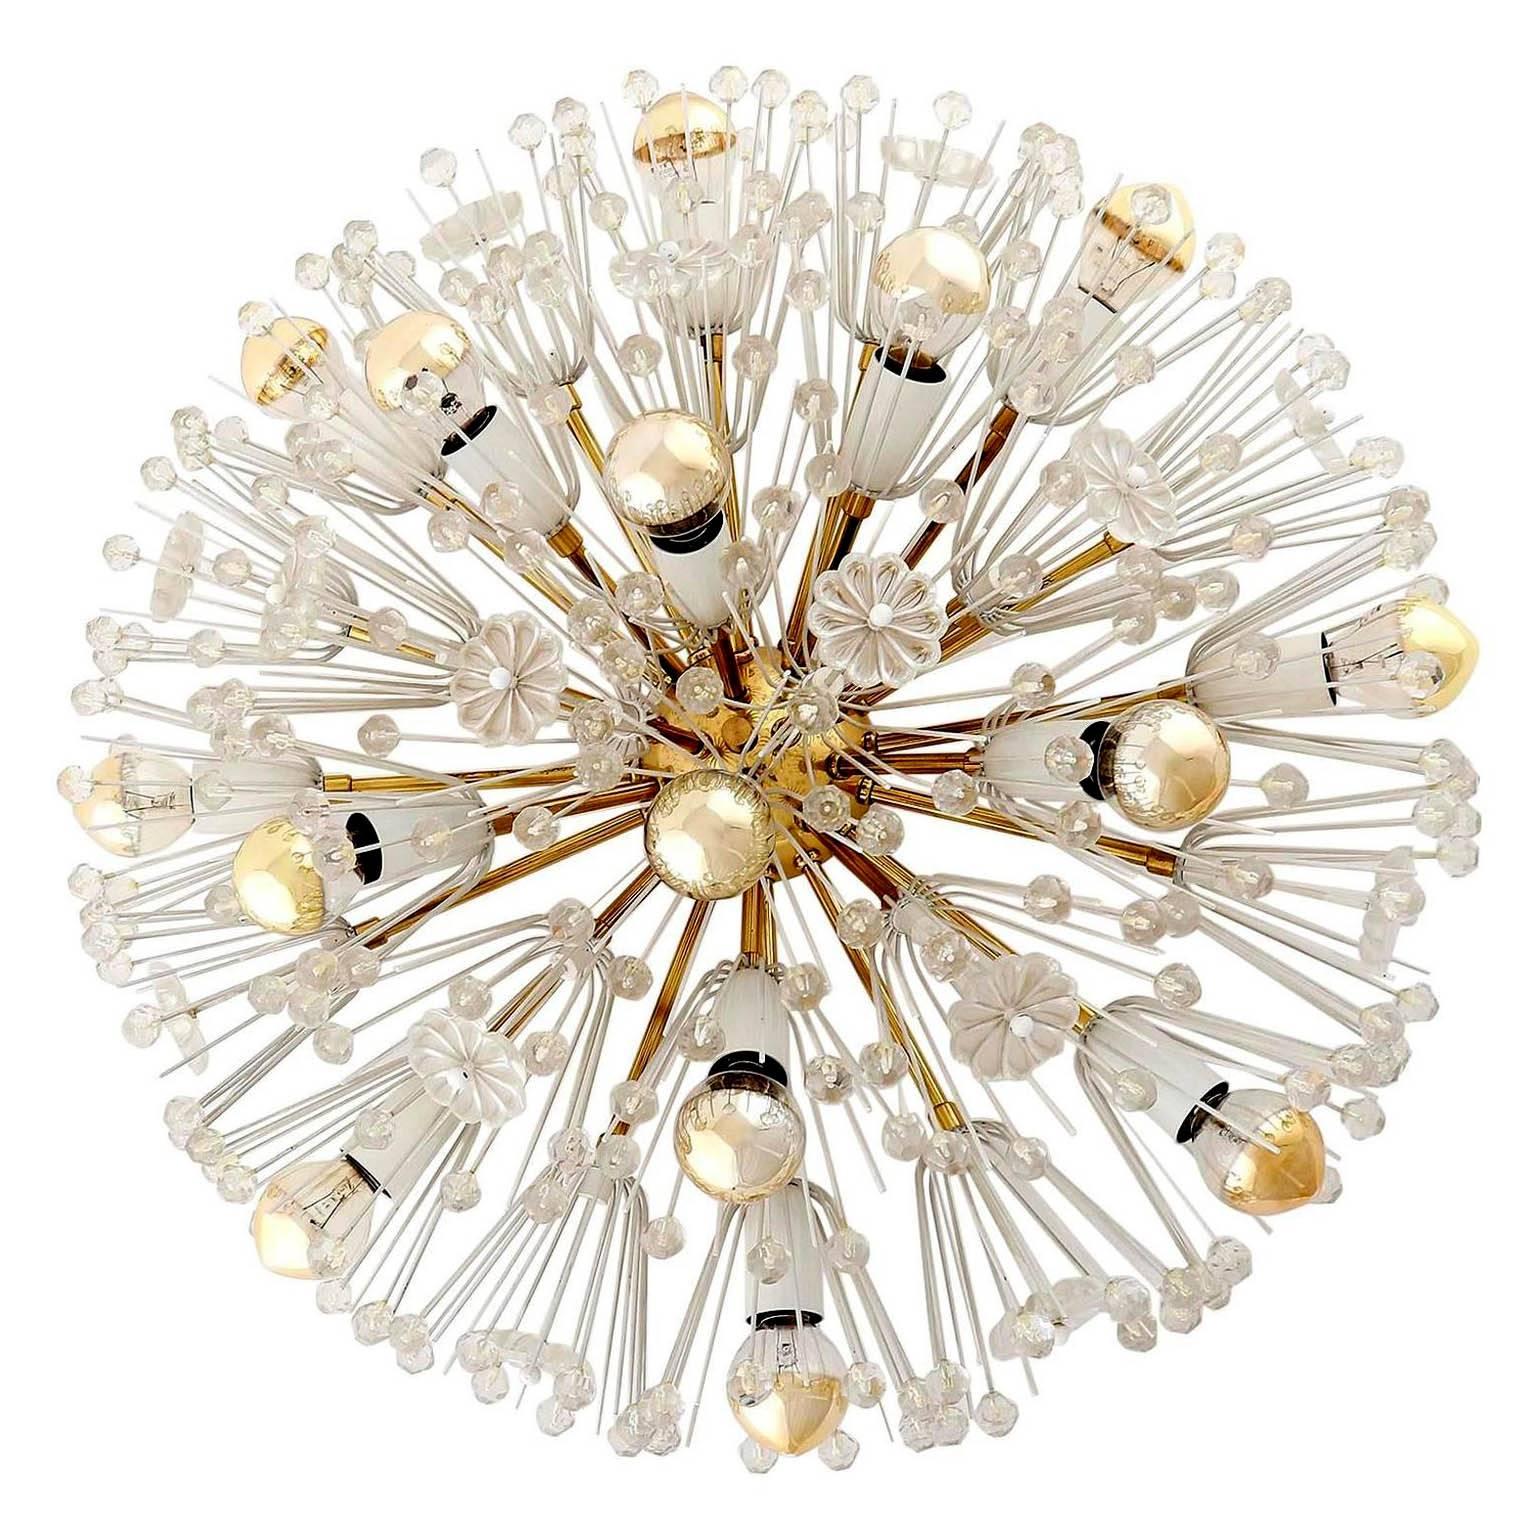 One of two large and outstanding 1950s Viennese Sputnik / blow ball / snowball light fixtures by Emil Stejnar for Rupert Nikoll, Vienna, Austria, manufactured in midcentury, circa 1950 (1950s-1960s).
They are made of brass, white enameled metal and